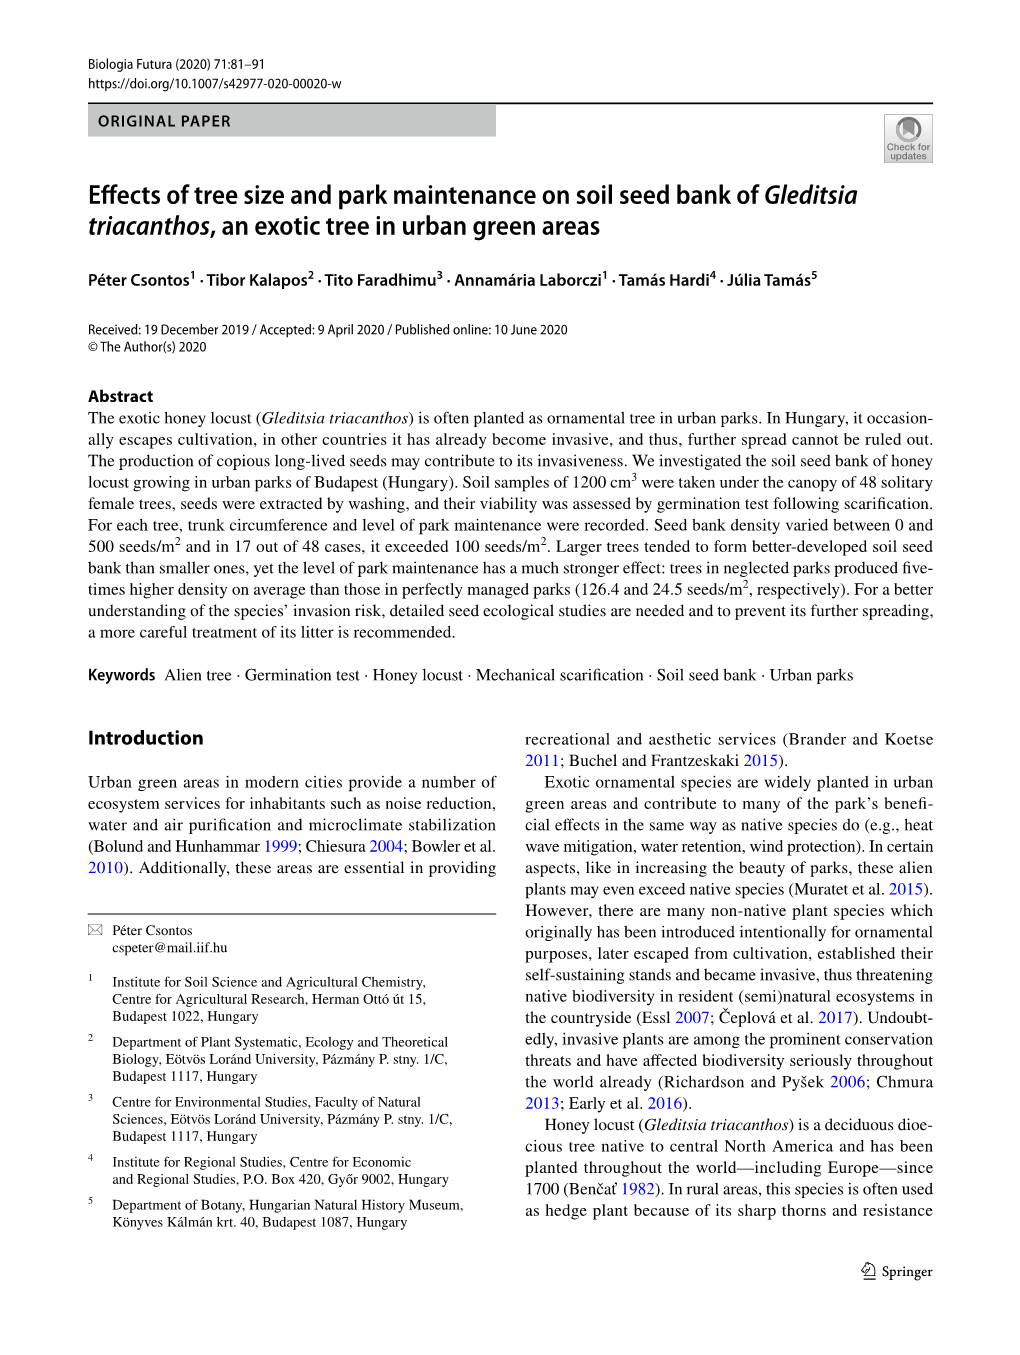 Effects of Tree Size and Park Maintenance on Soil Seed Bank Of